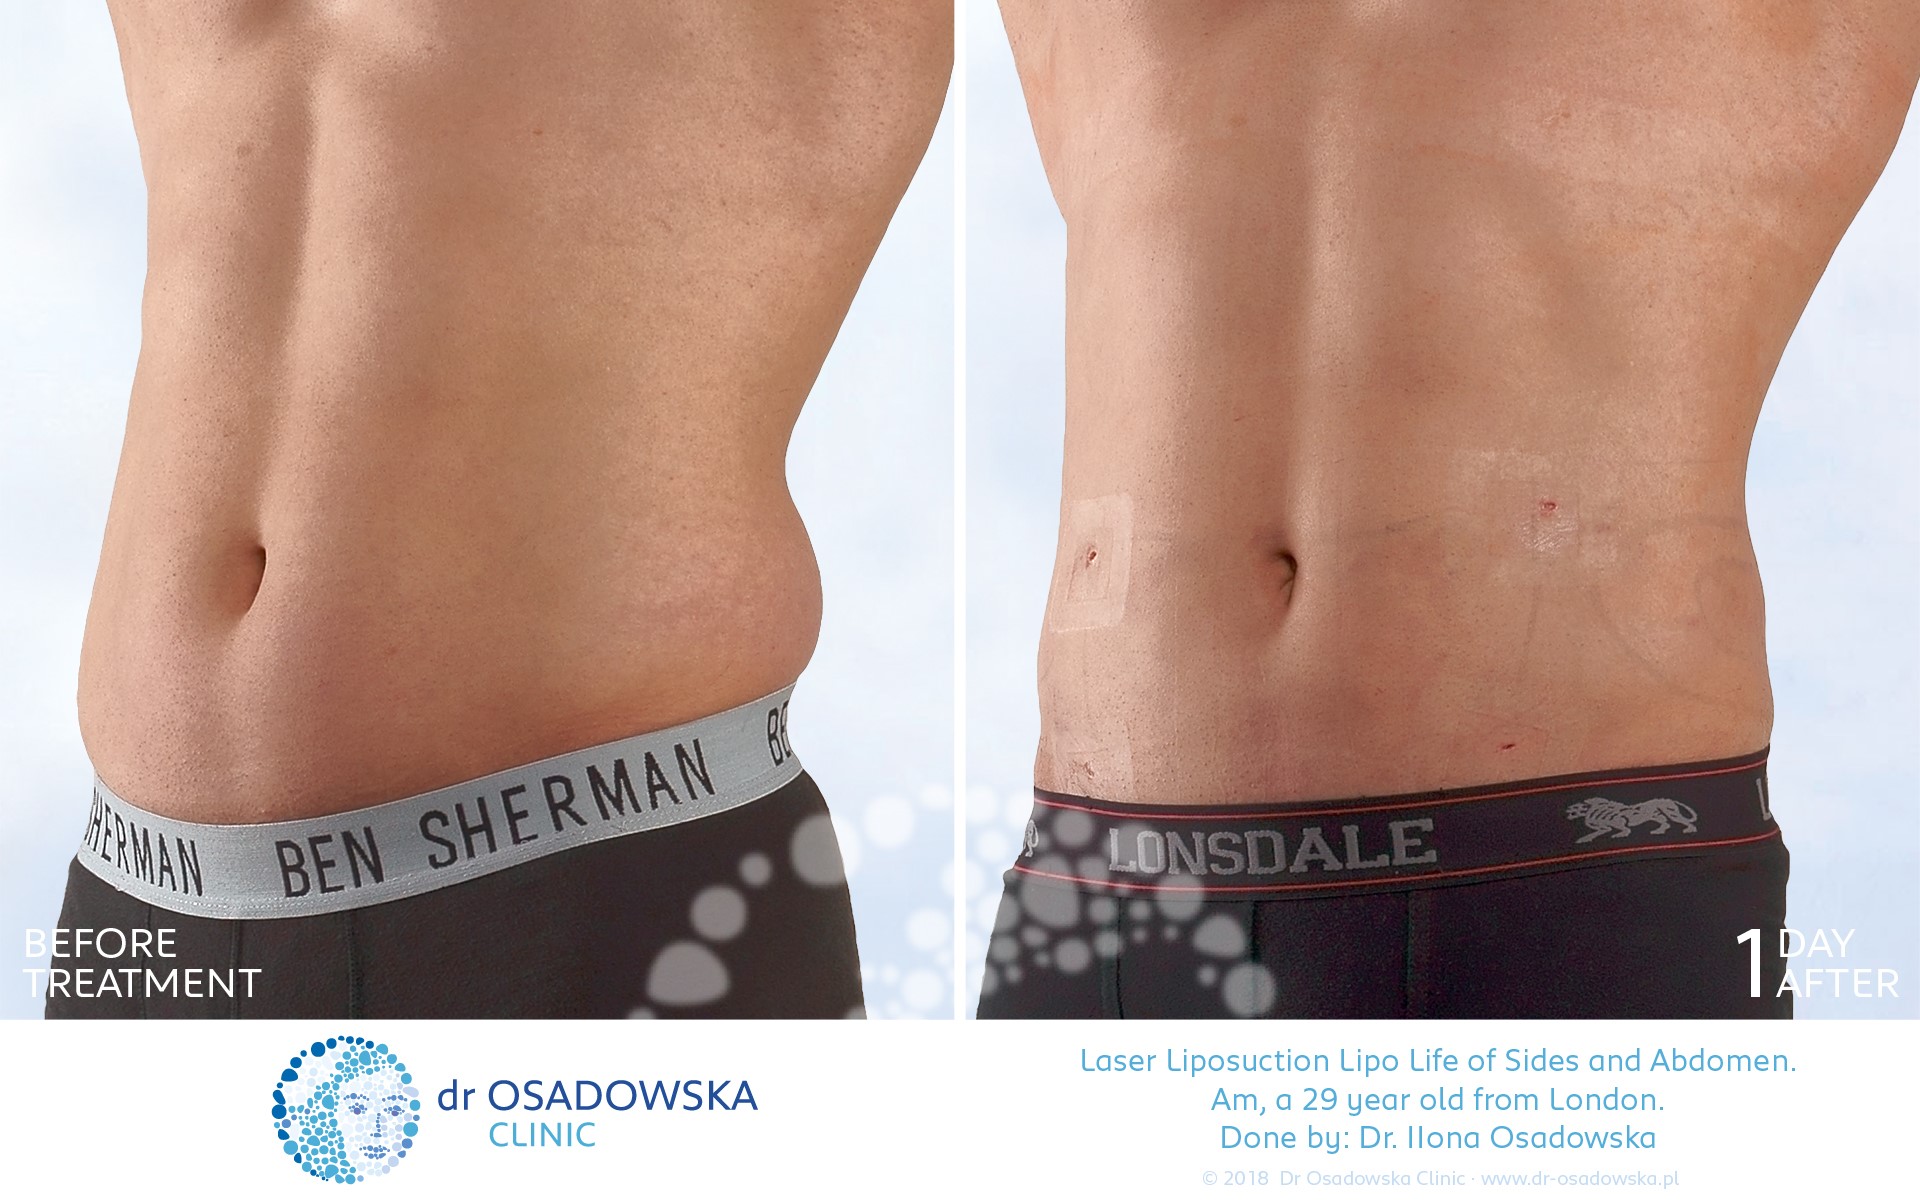 Liposuction abdomen flanks, LipoLife, before after, 3 months, back view